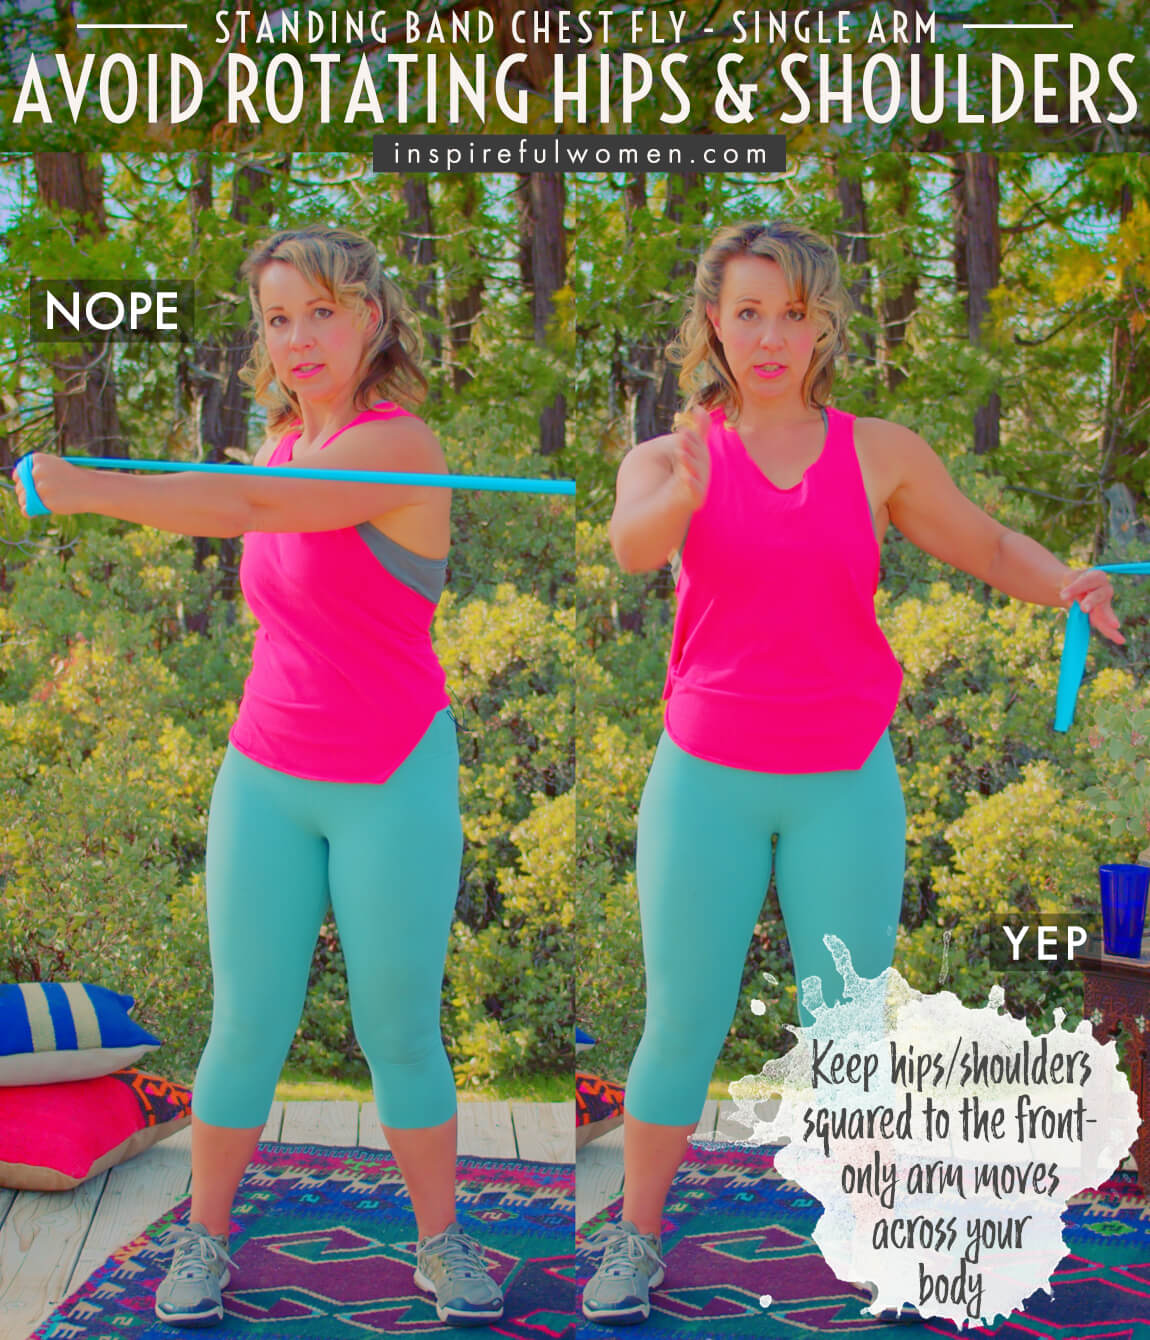 avoid-rotating-hips-and-shoulders-single-arm-standing-band-chest-fly-exercise-proper-form